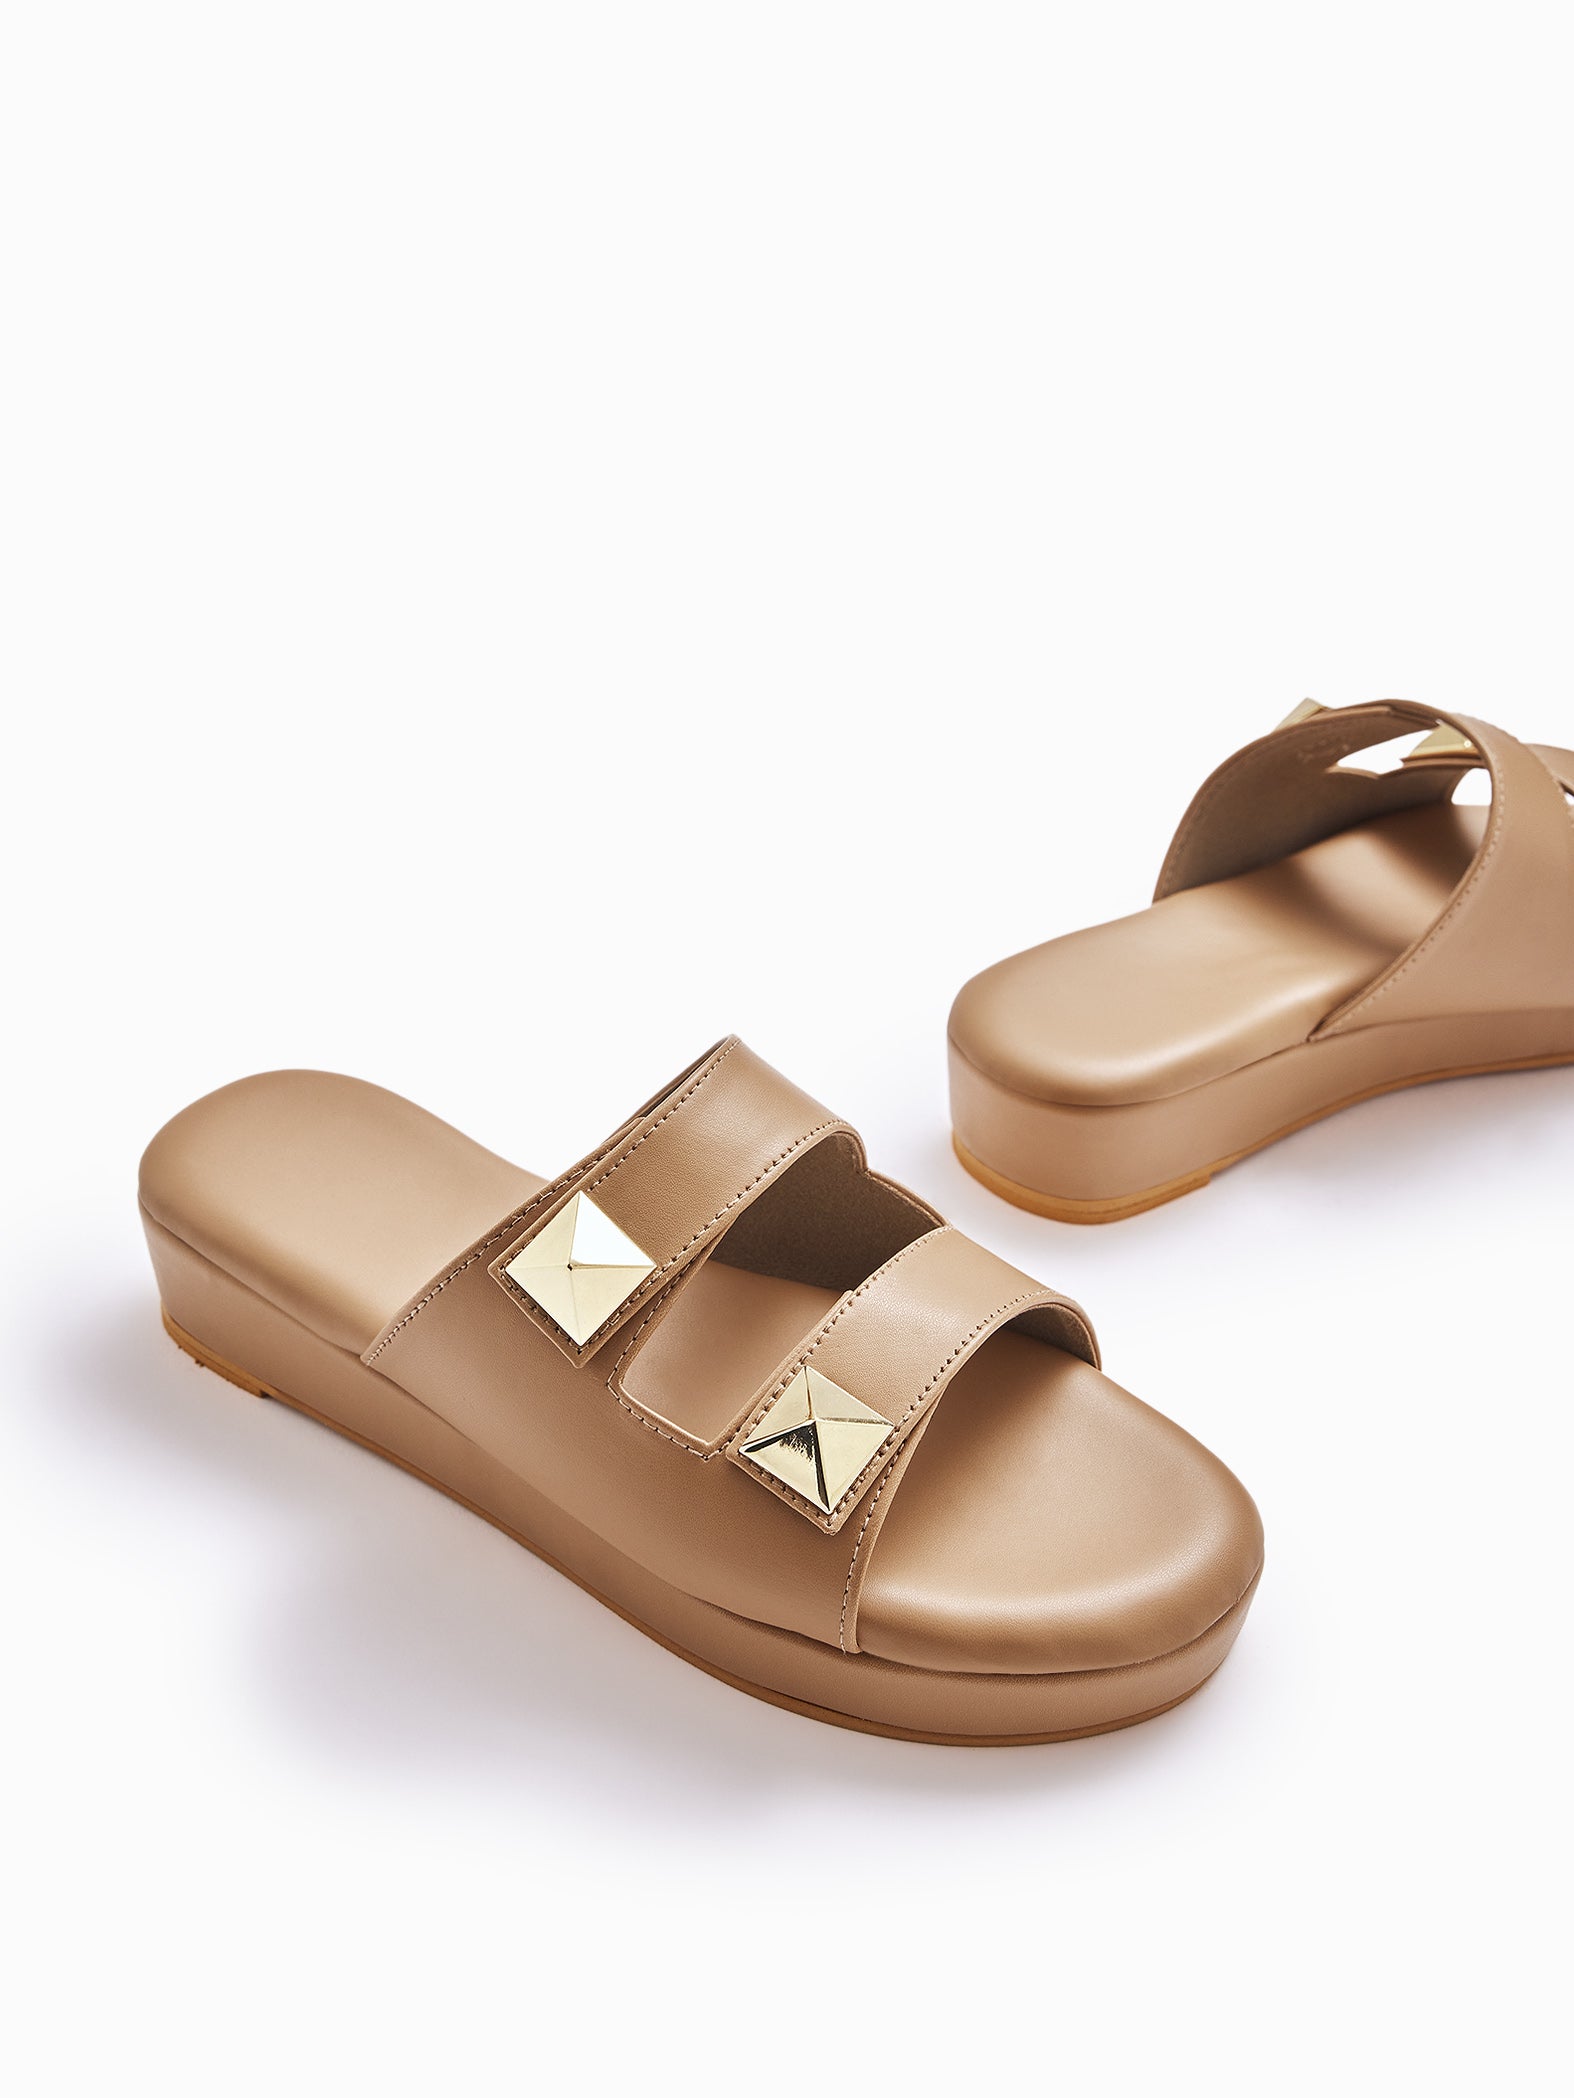 Tan Studded Cut Out Strap Sliders